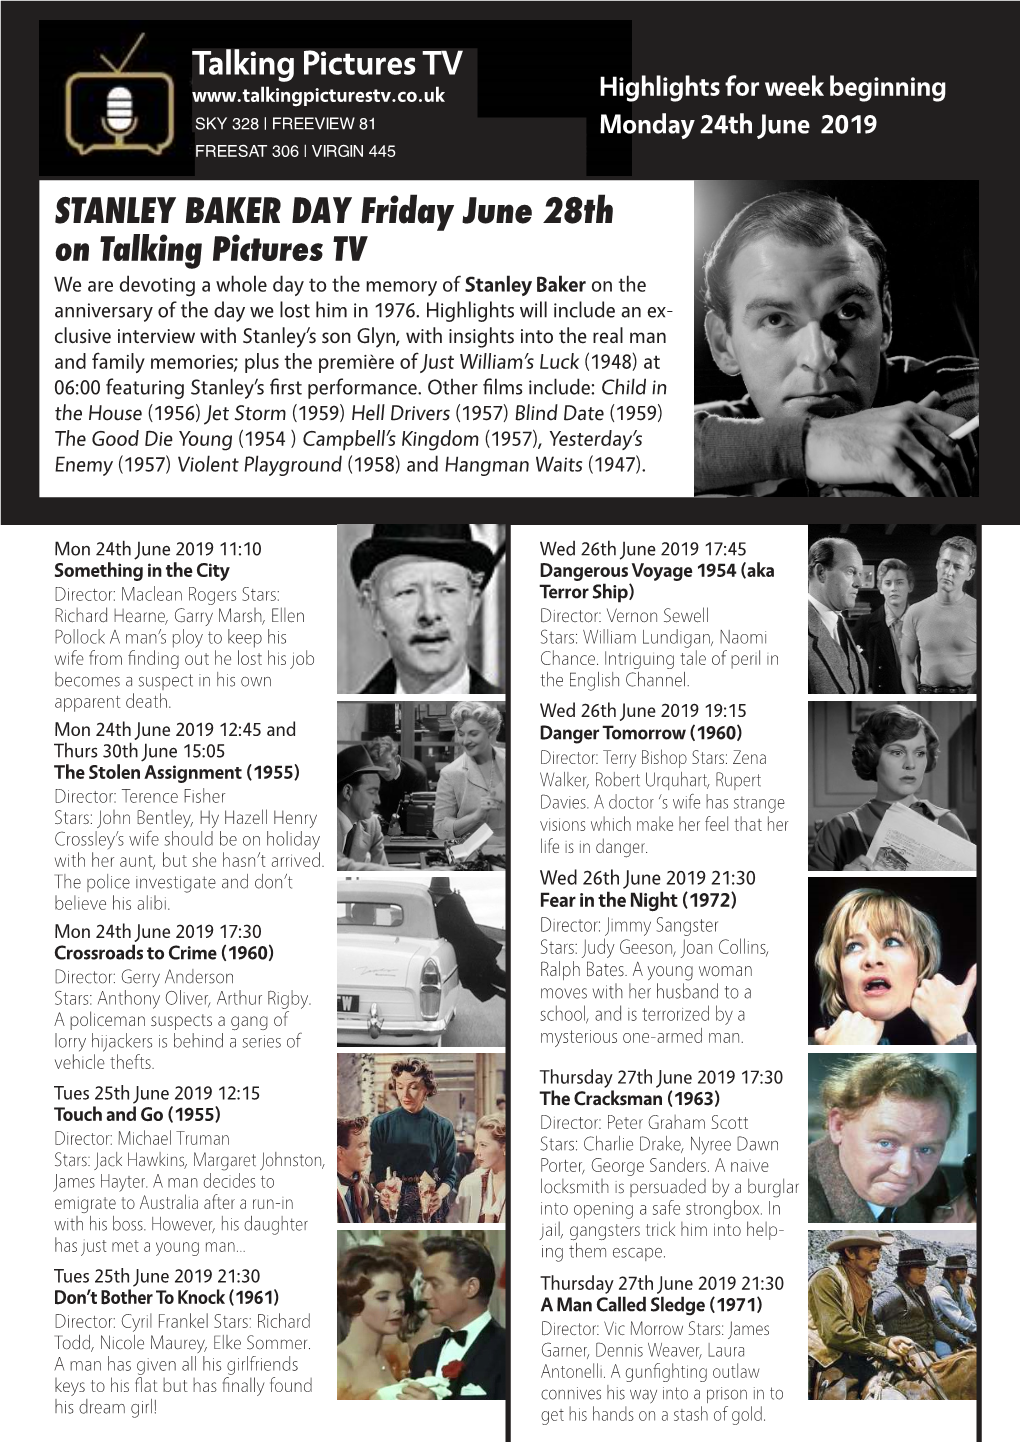 STANLEY BAKER DAY Friday June 28Th Talking Pictures TV